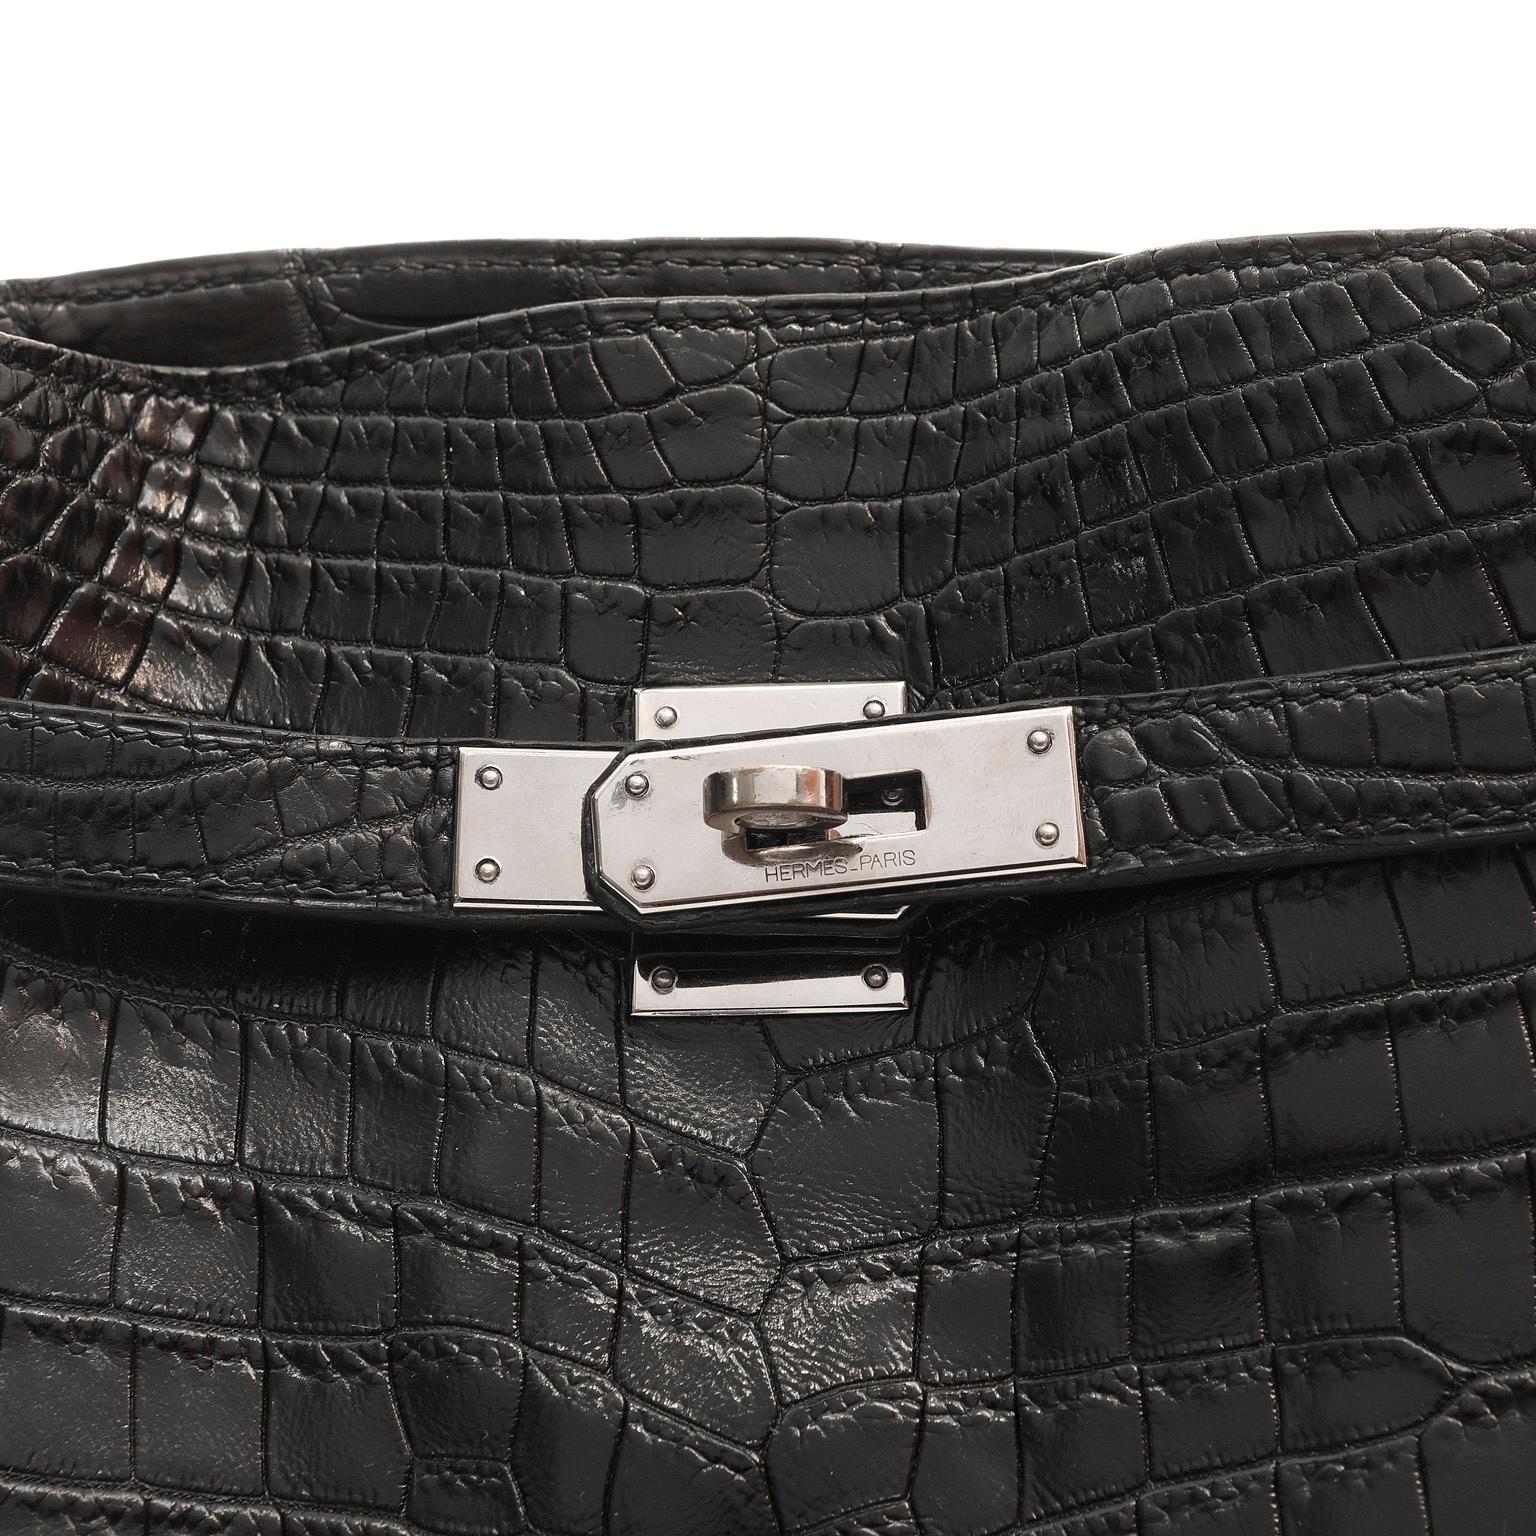 This authentic Hermès Vintage Black Niloticus Crocodile 26 cm Kelly Sport is in excellent plus condition, nearly pristine.  This style is no longer in production and highly collectible.  

Hermès bags are considered the ultimate luxury item the